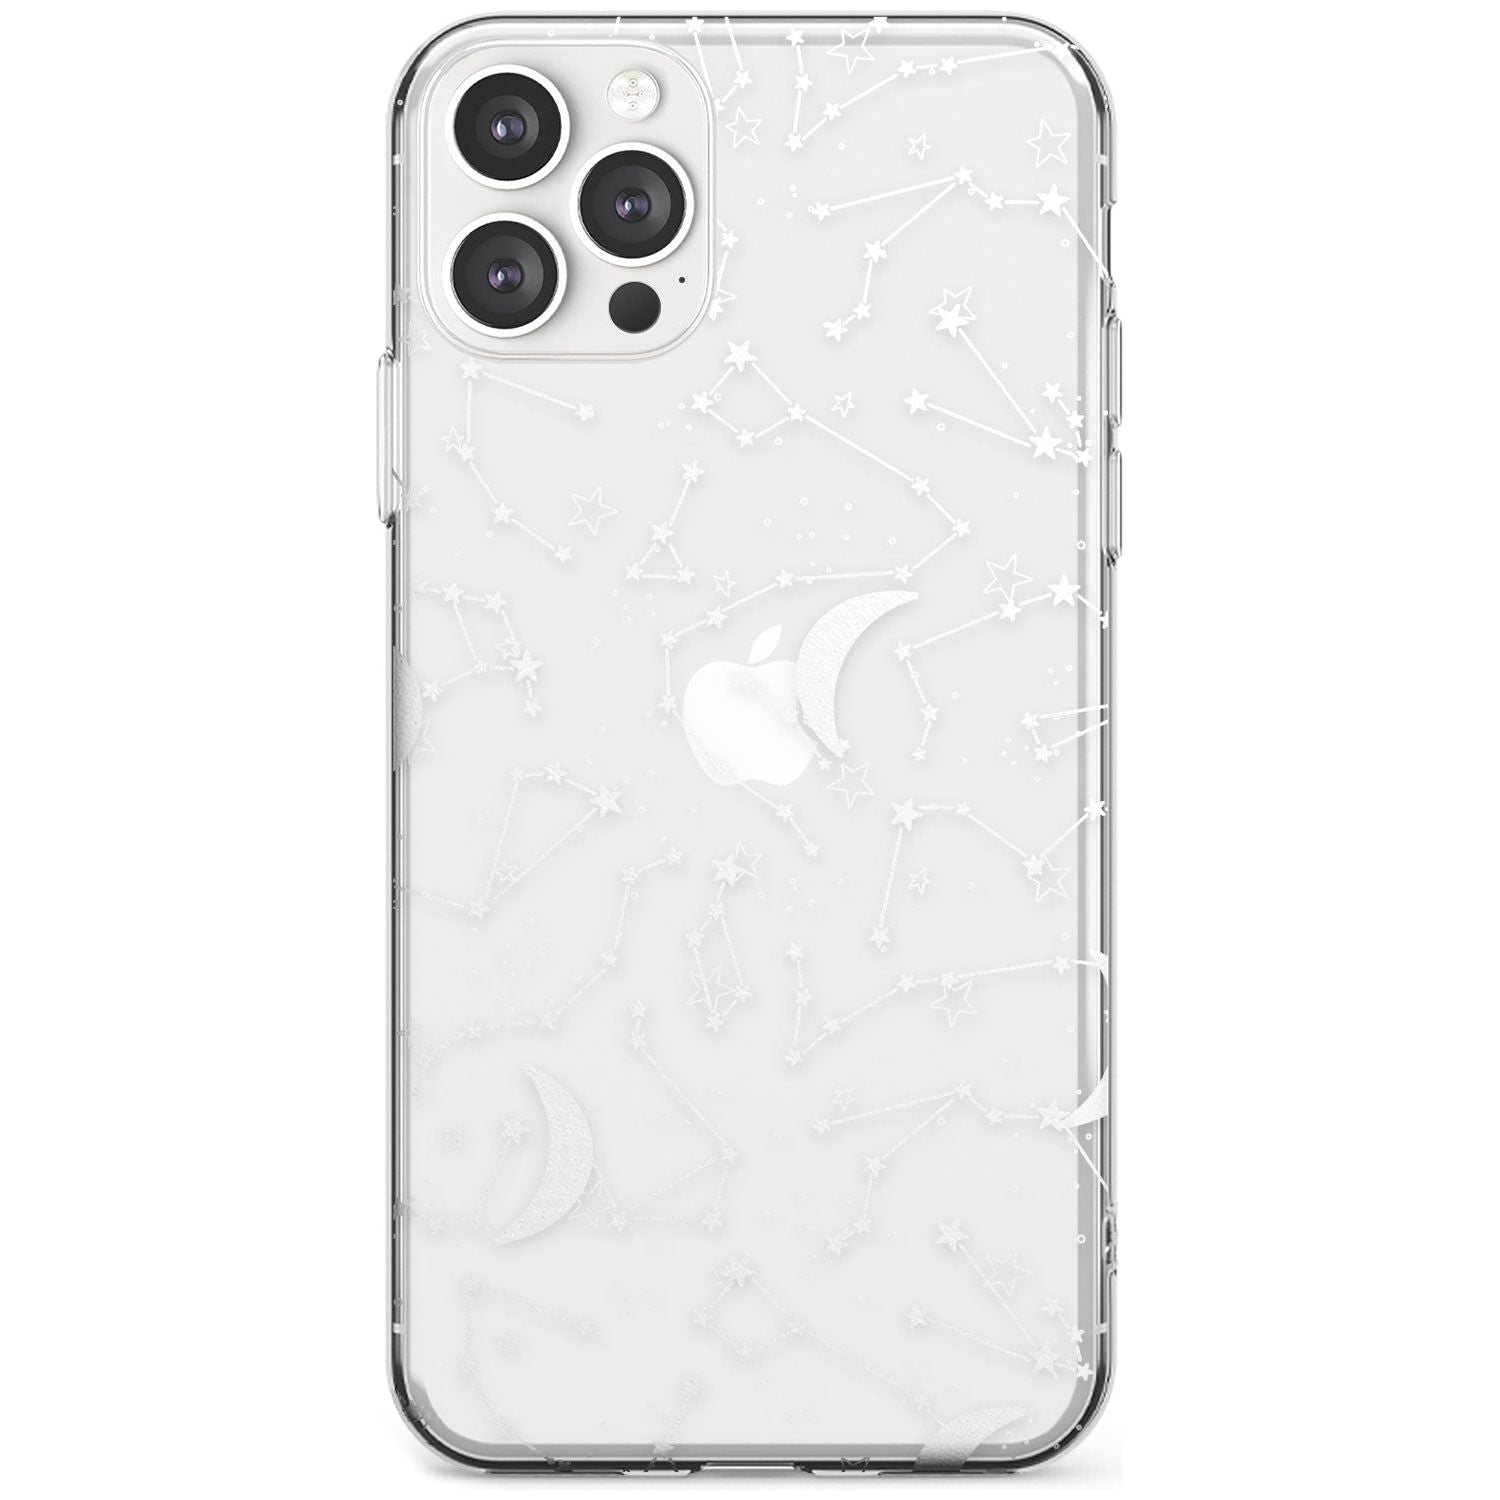 White Constellations on Clear Black Impact Phone Case for iPhone 11 Pro Max